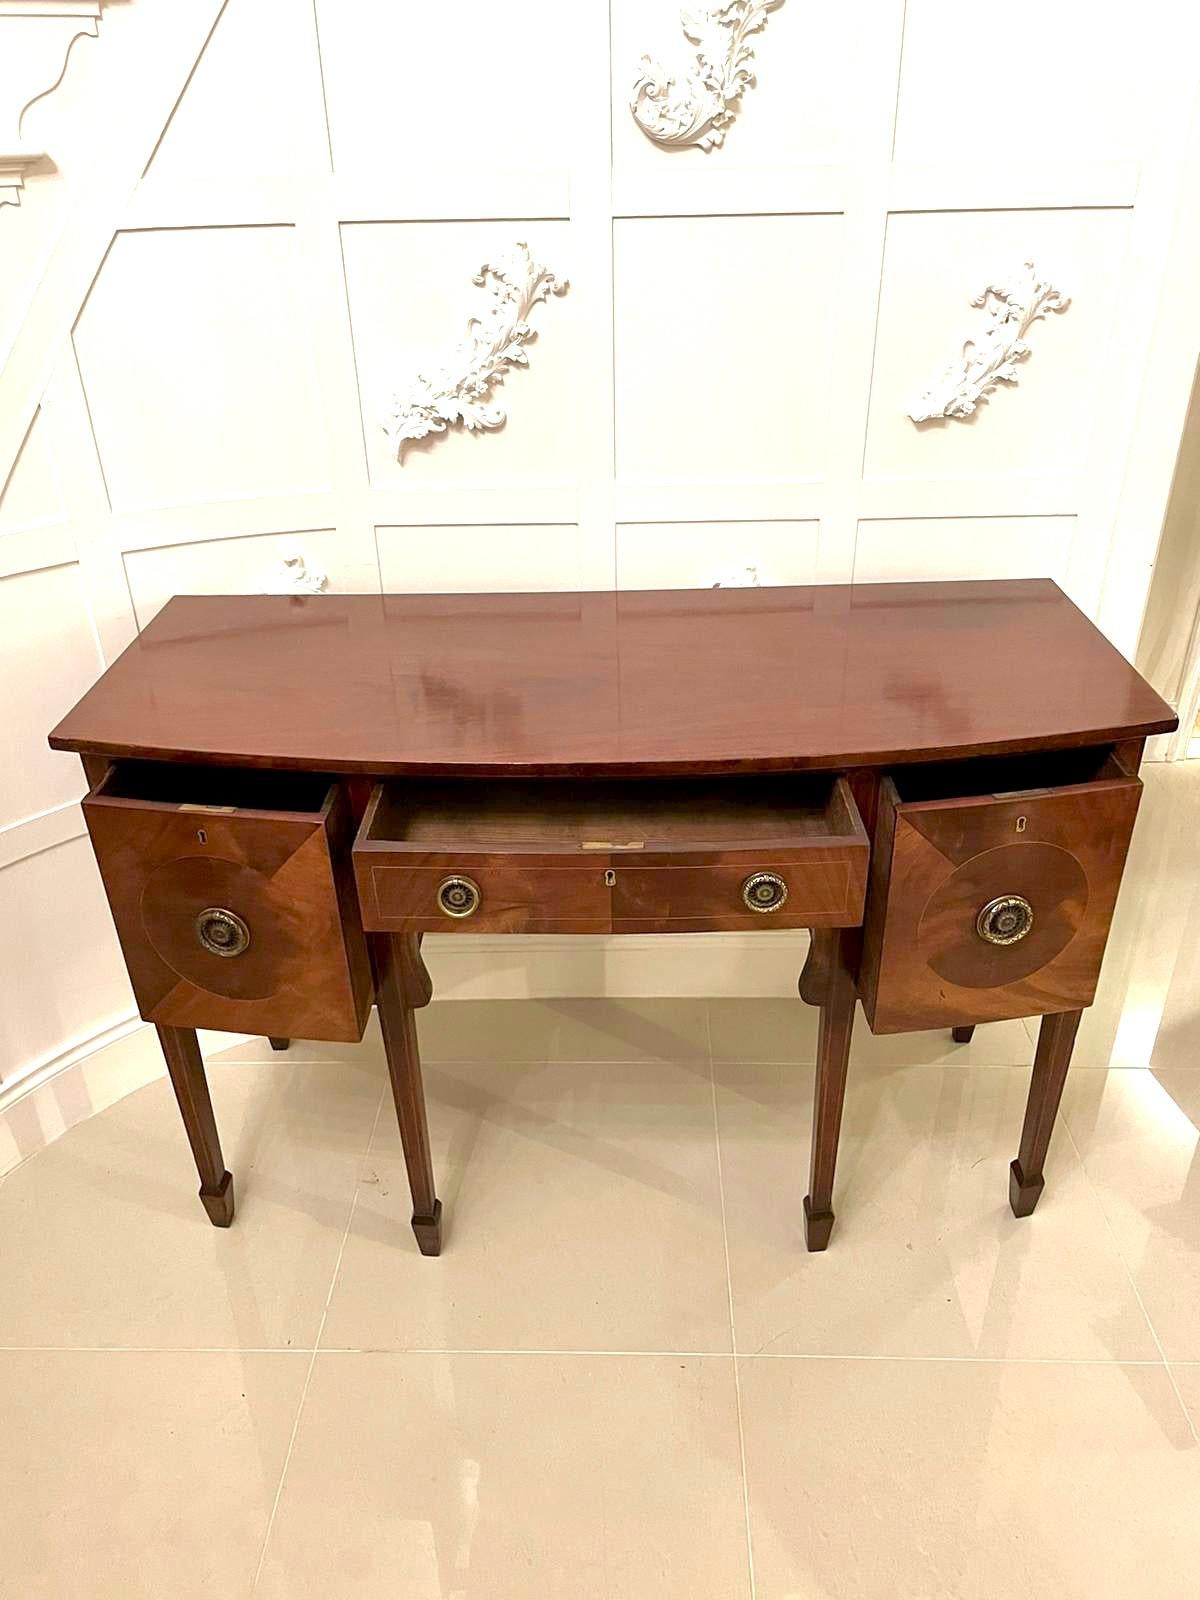 19th century George III antique mahogany bow fronted sideboard having an impressive quality mahogany top, one long bow fronted drawer to the centre with original brass handles and standing on six elegant square tapering legs with spade feet.

A